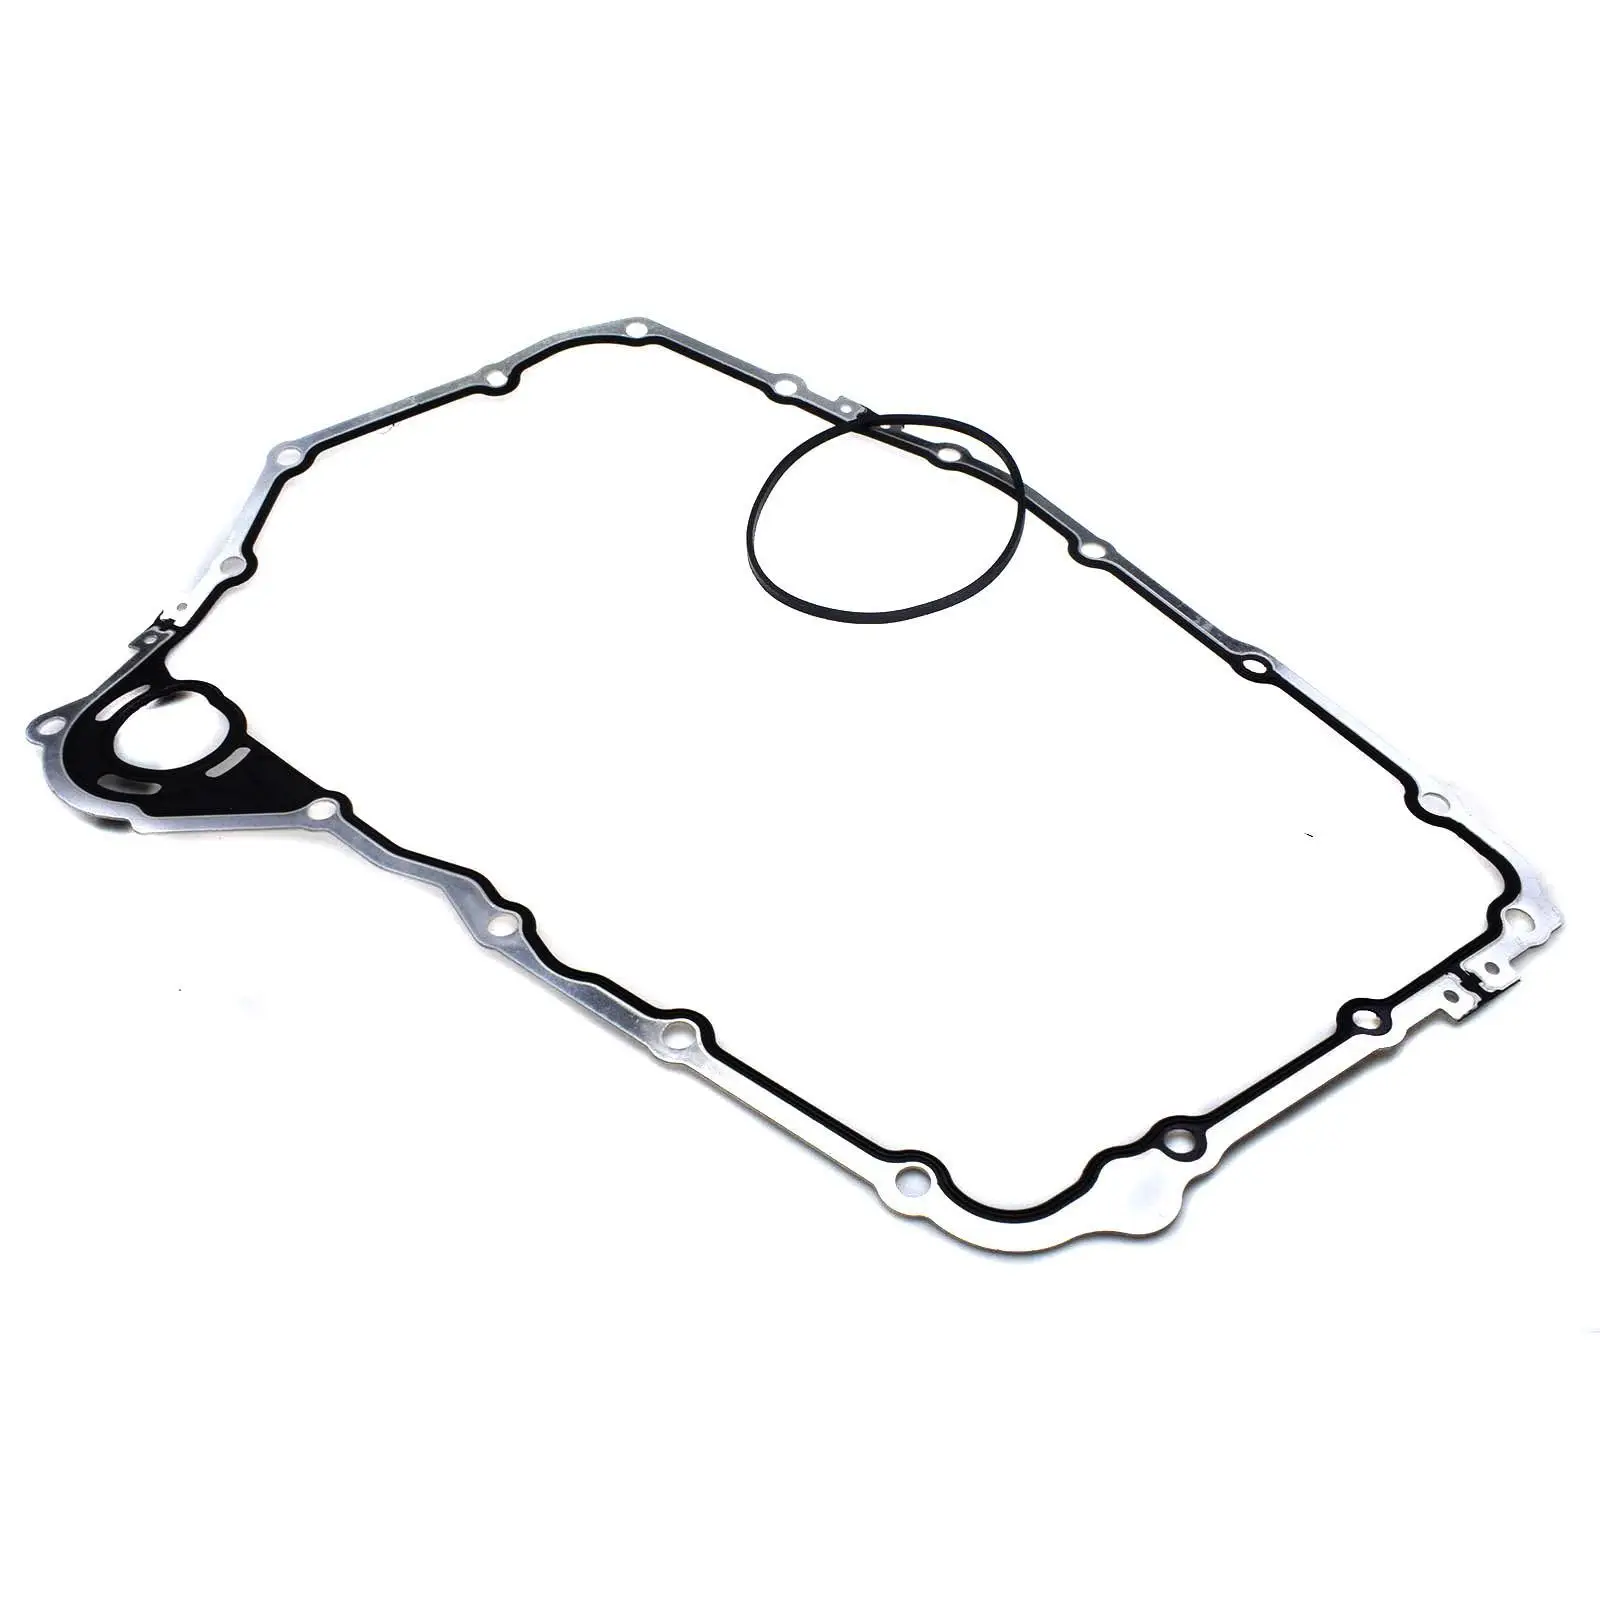 4T65E Engine Automatic Transmission Case Gasket Side Cover Seal Kit for Buick 3.0 2.5/S80 Automotive Accessory Rubber